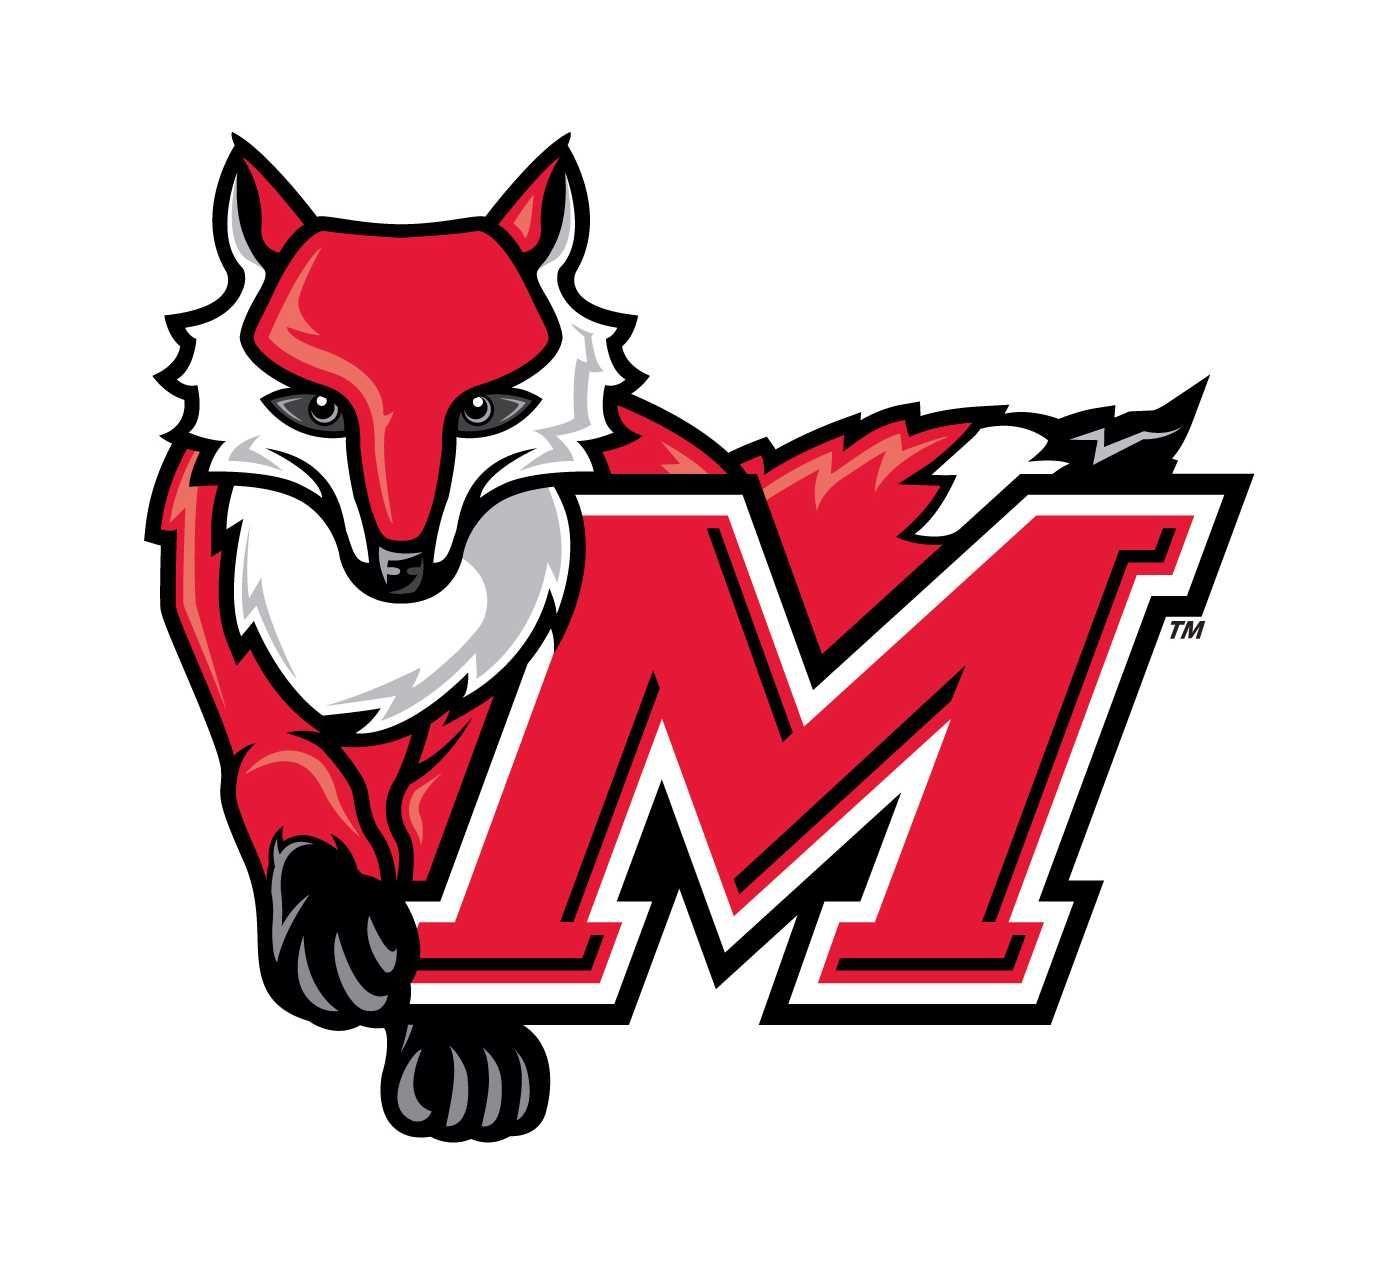 College Red Logo - Image result for marist college logo | The Red Foxes | Pinterest ...